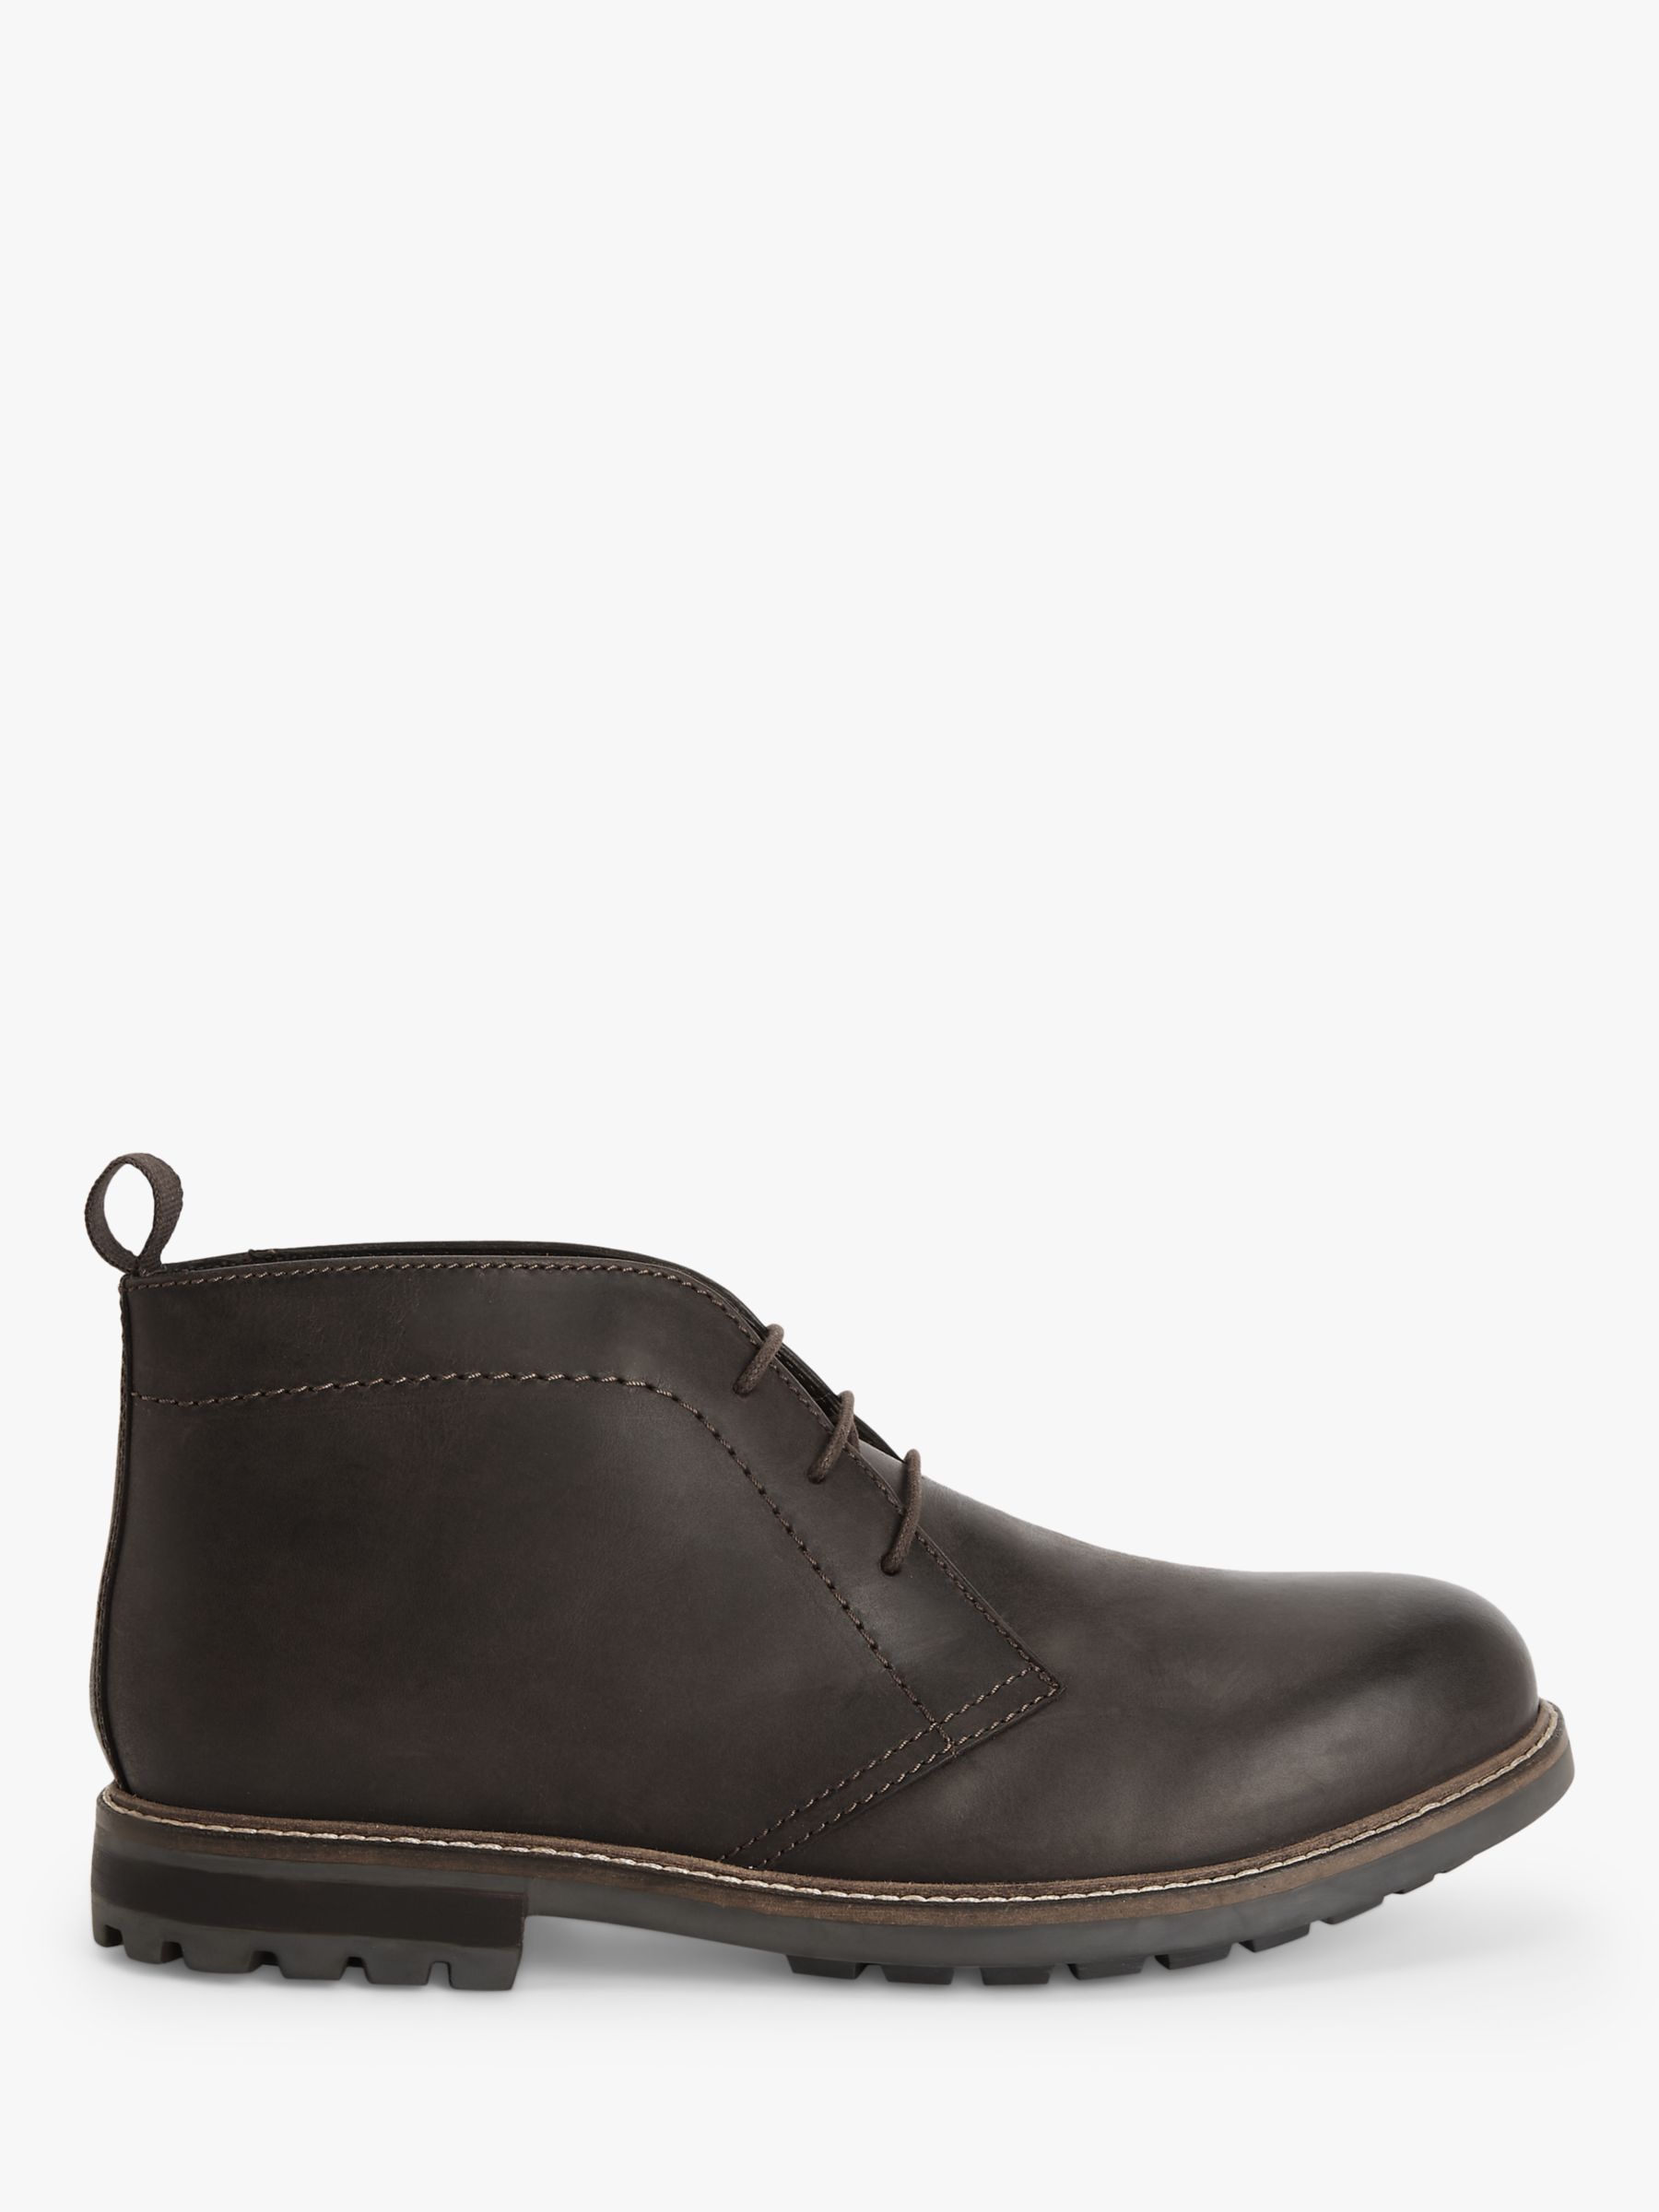 John Lewis Leather Lace Up Chukka Boots, Dark Brown